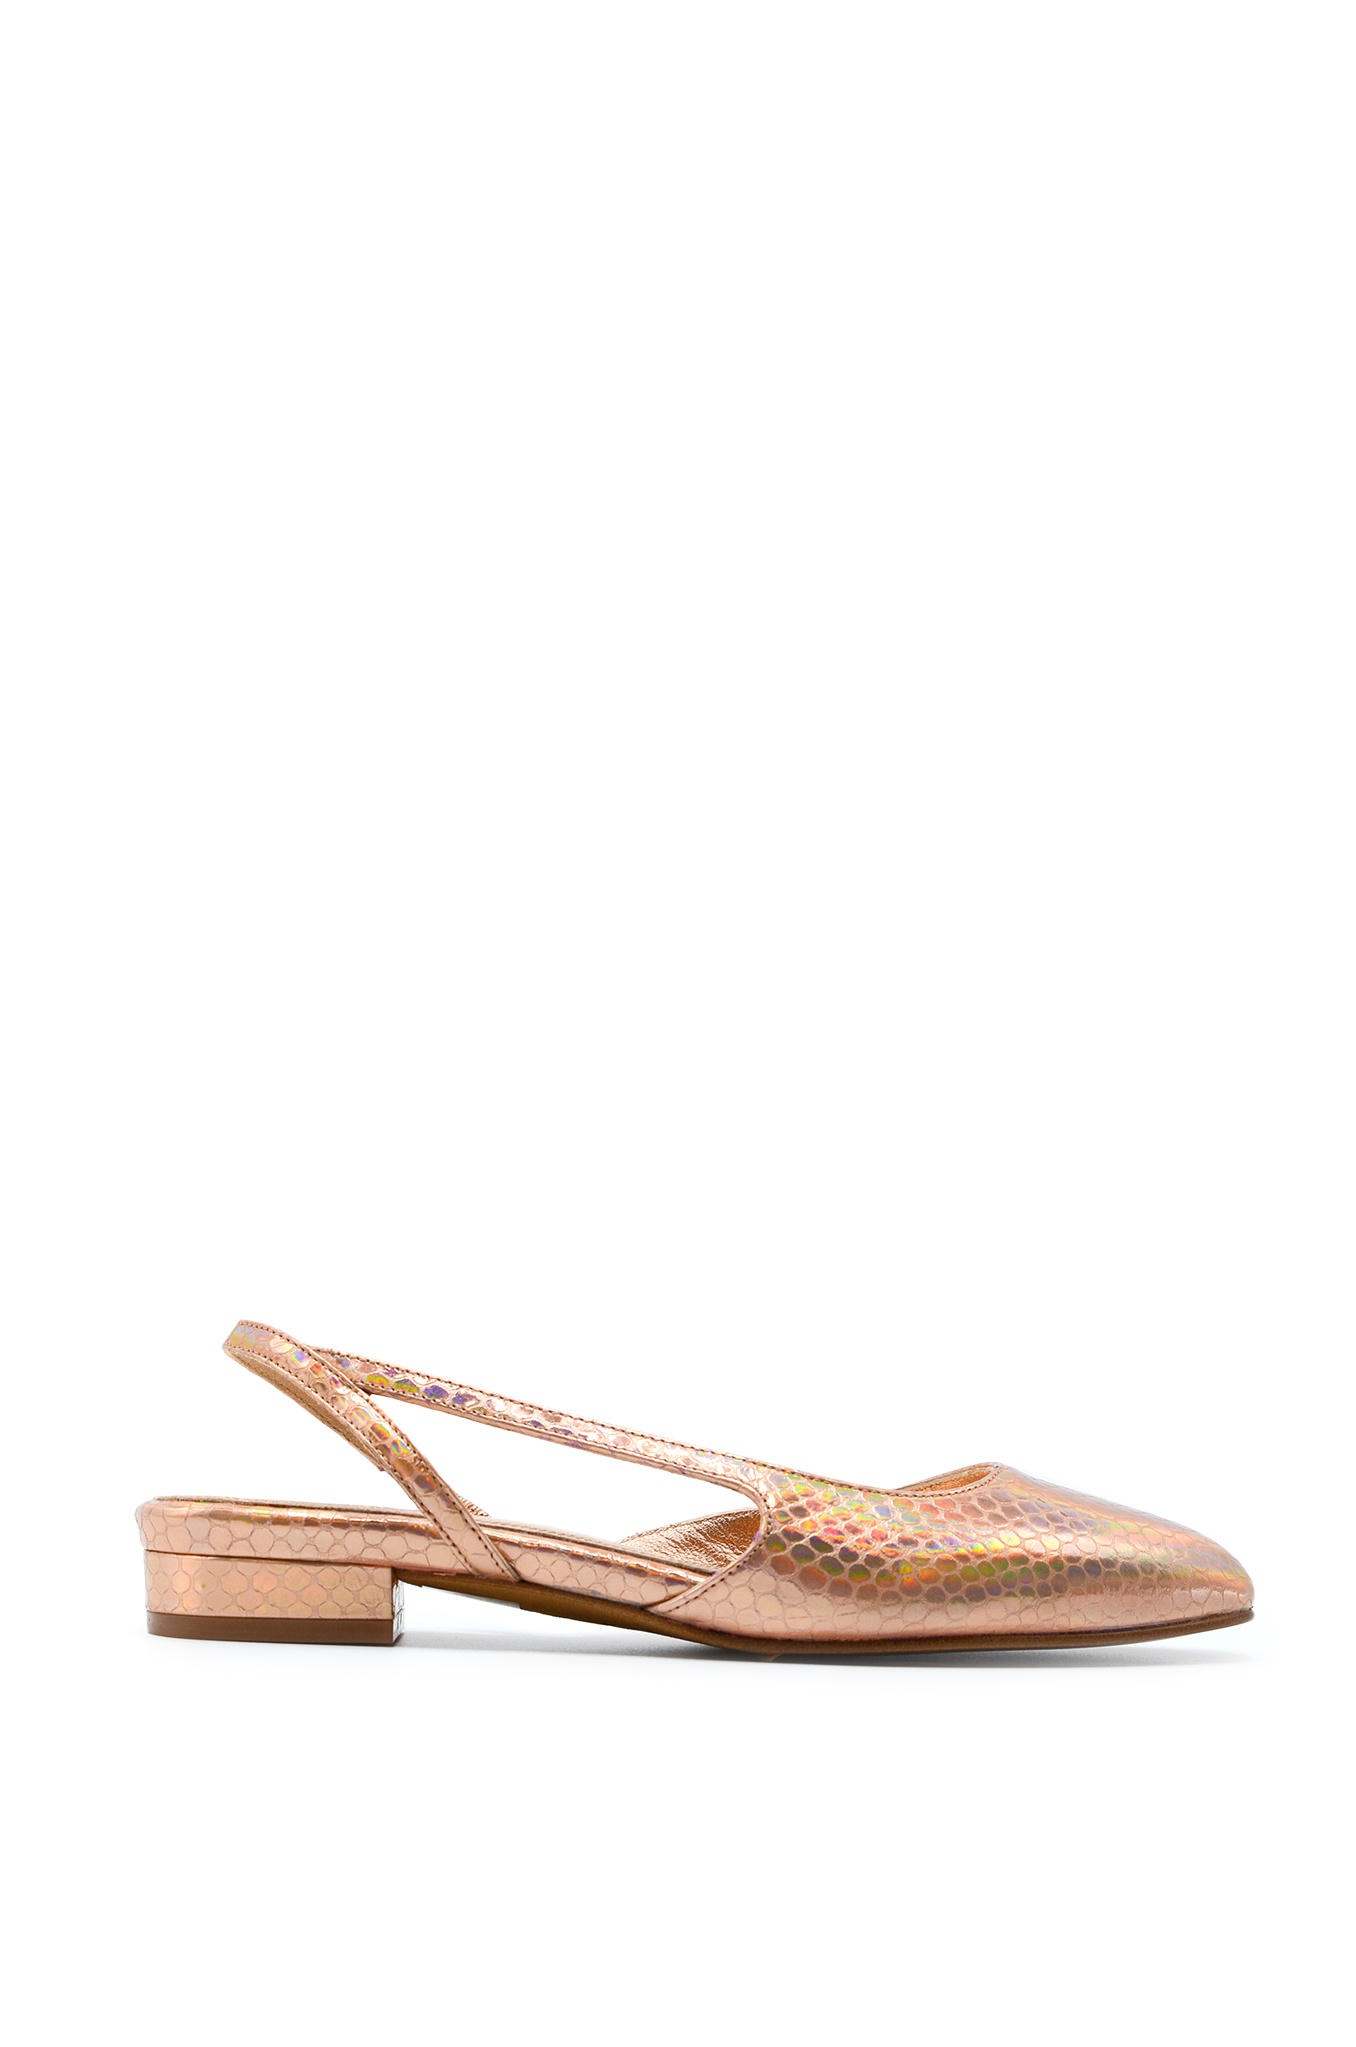 Lina Textured Sandals in Champagne-1